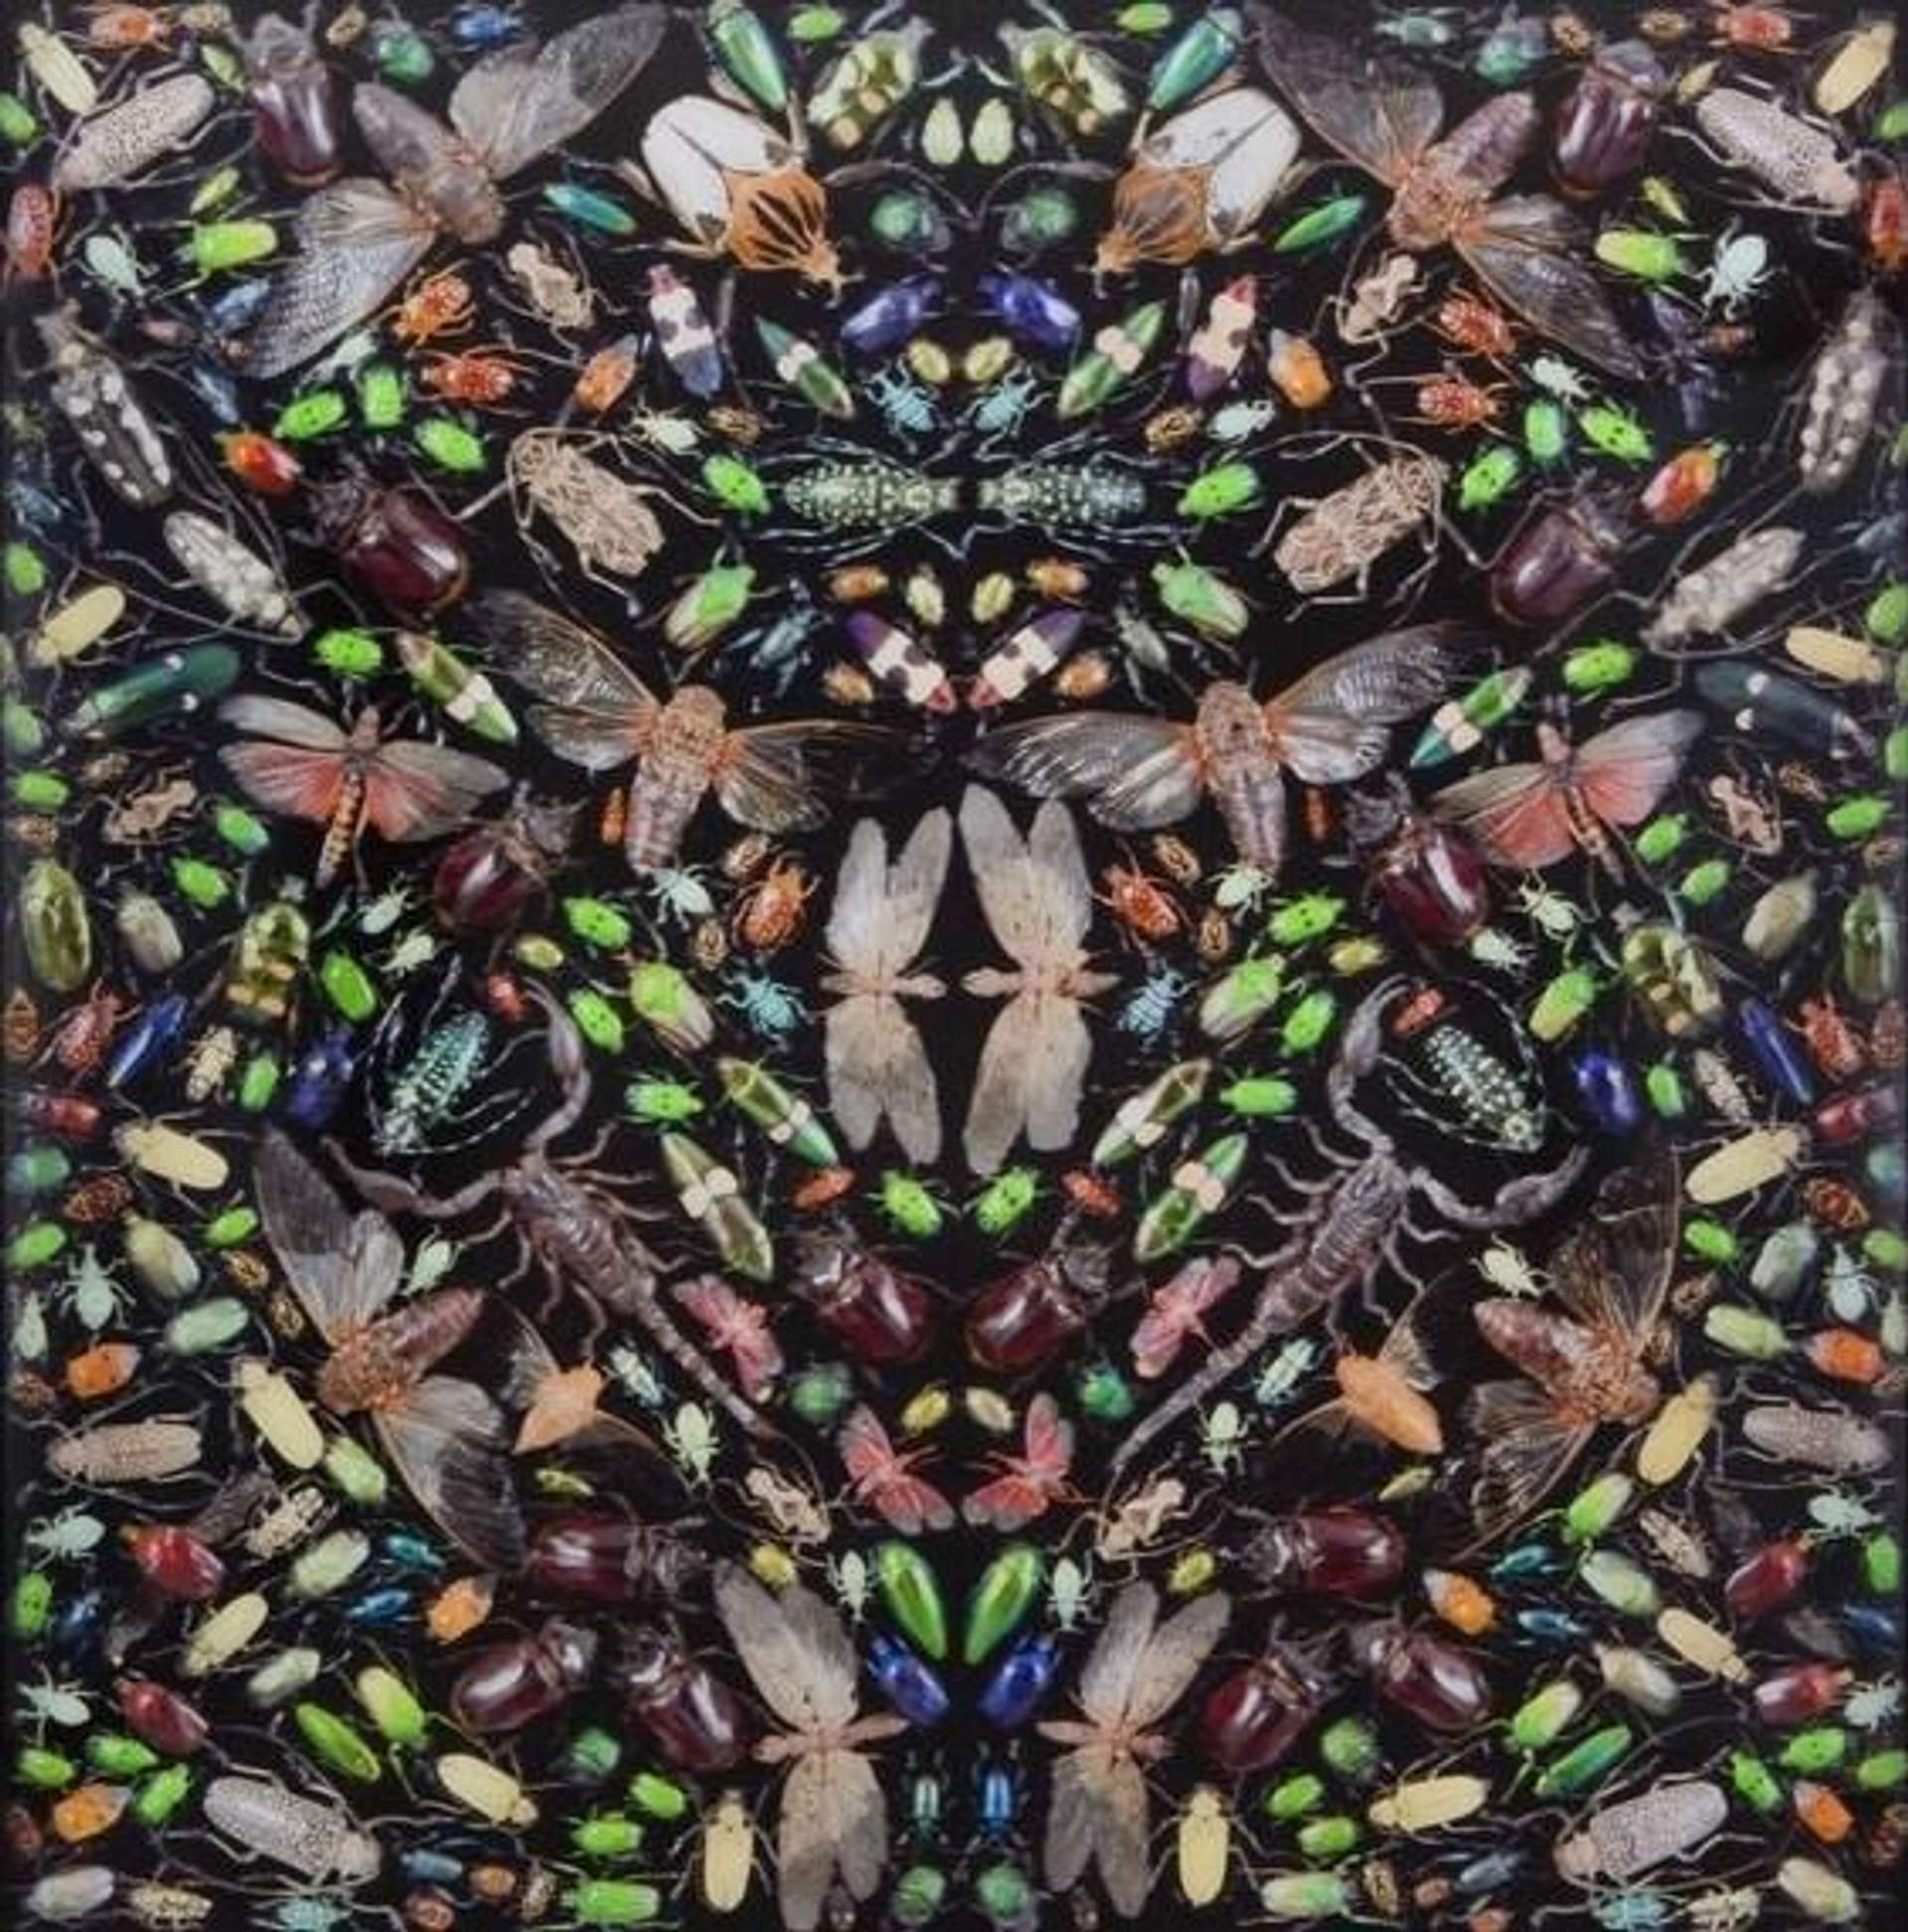 Damien Hirst’s Inferno. A lenticular print of an assortment of insects in a mirrored pattern.